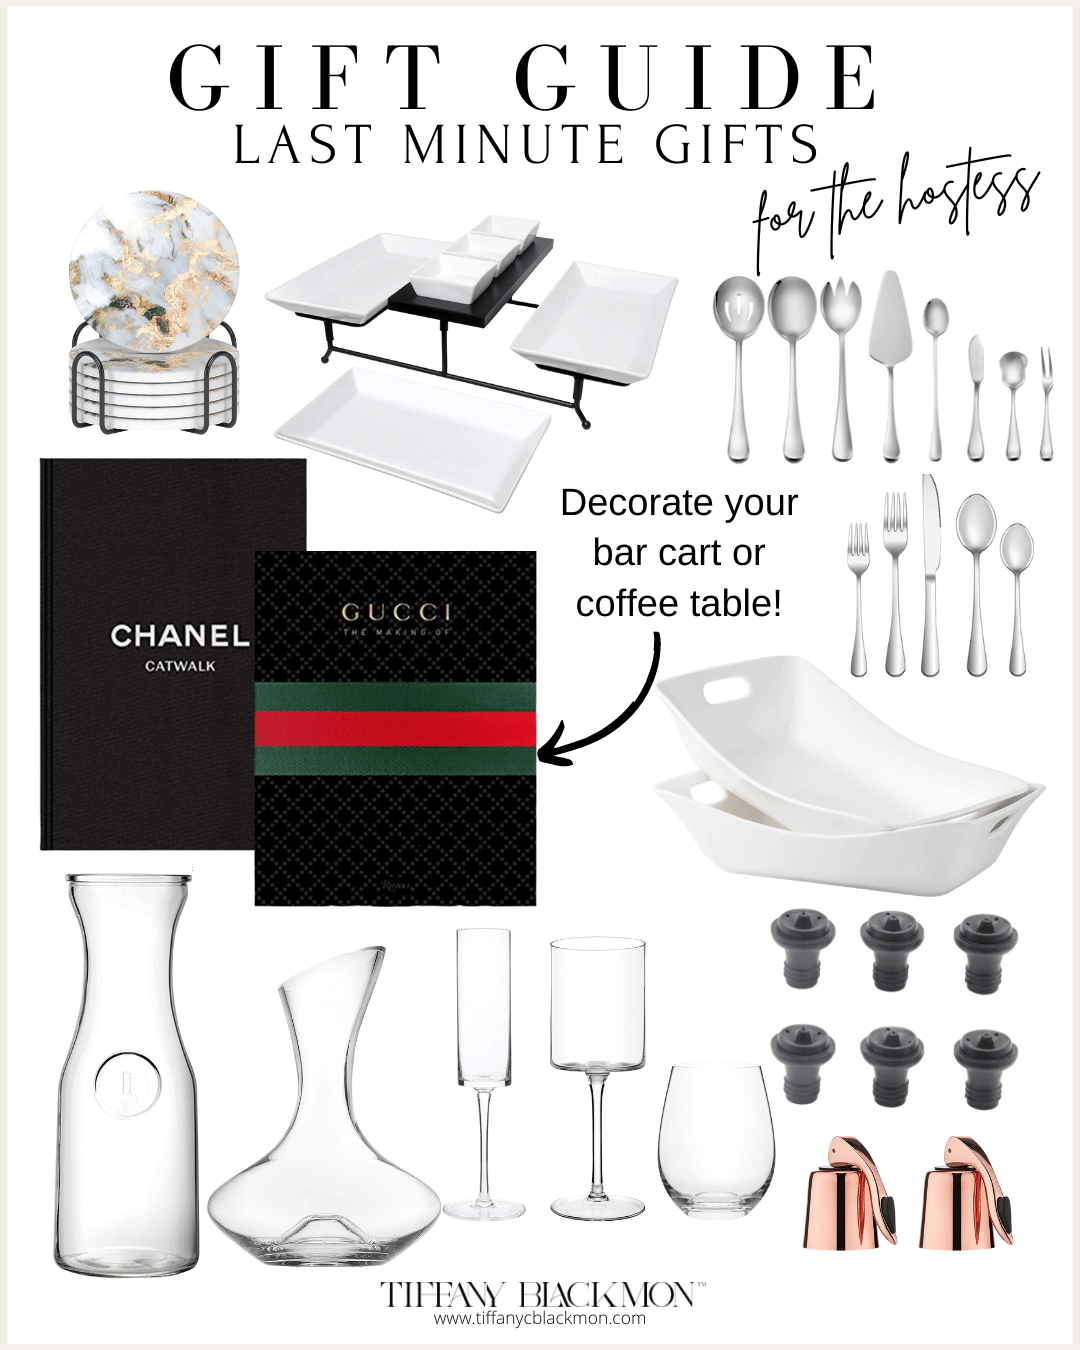 Last Minute Gifts For The Hostess

#Holiday #Holidaygifting #Lastminute gifts #Giftsforhim # Giftsforher #Hostessgifts #Curbsidegifts #Christmas2022